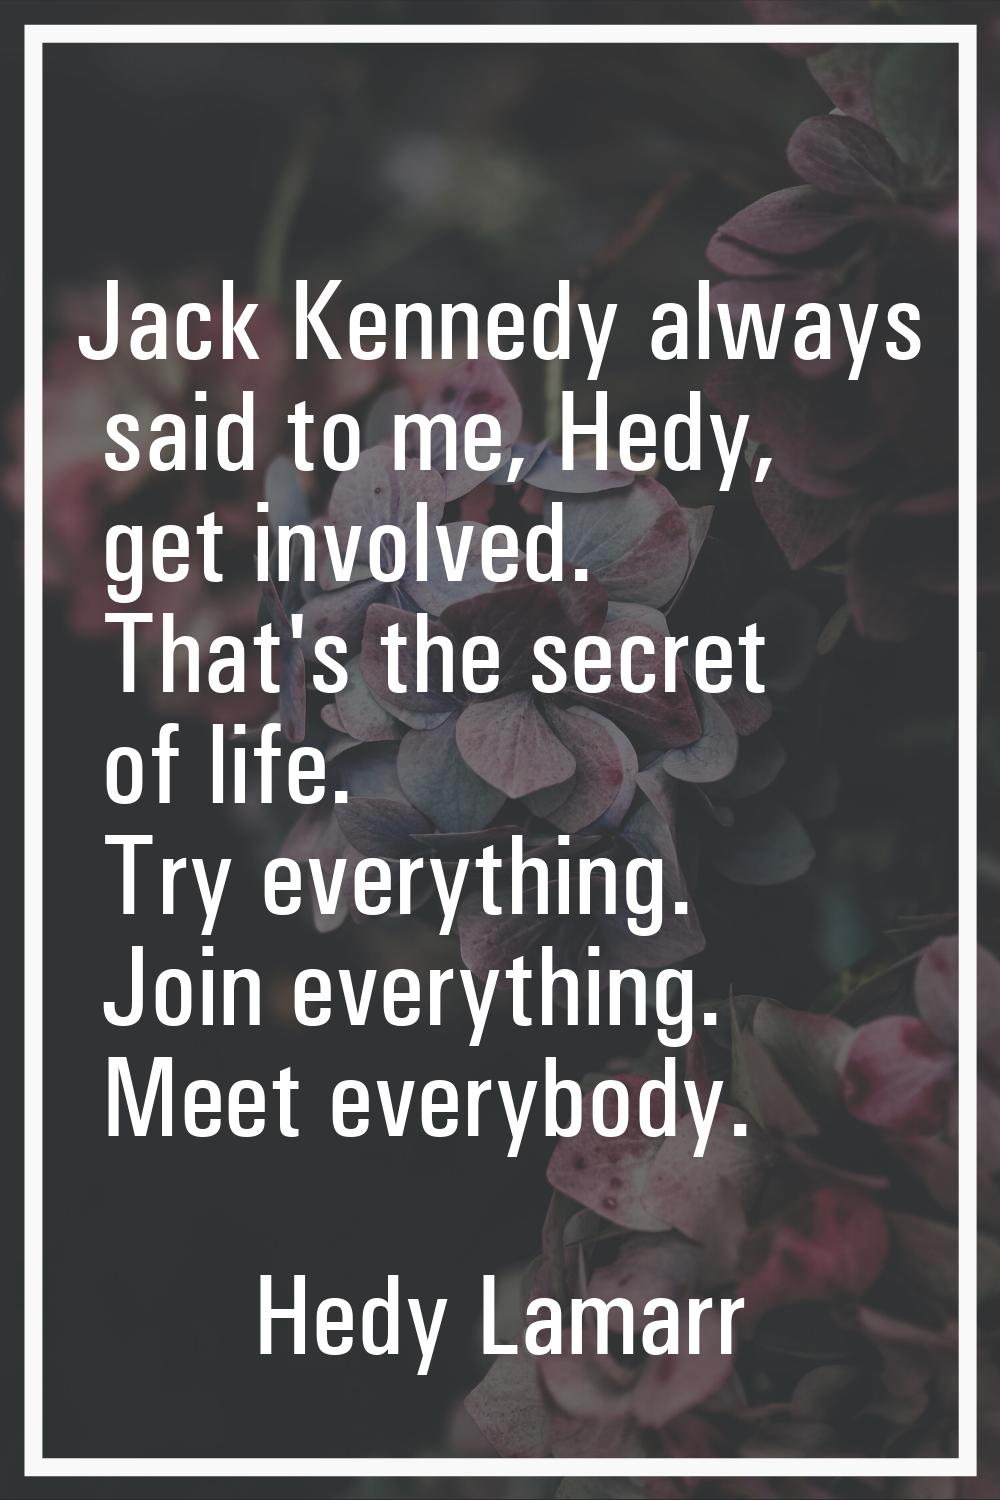 Jack Kennedy always said to me, Hedy, get involved. That's the secret of life. Try everything. Join